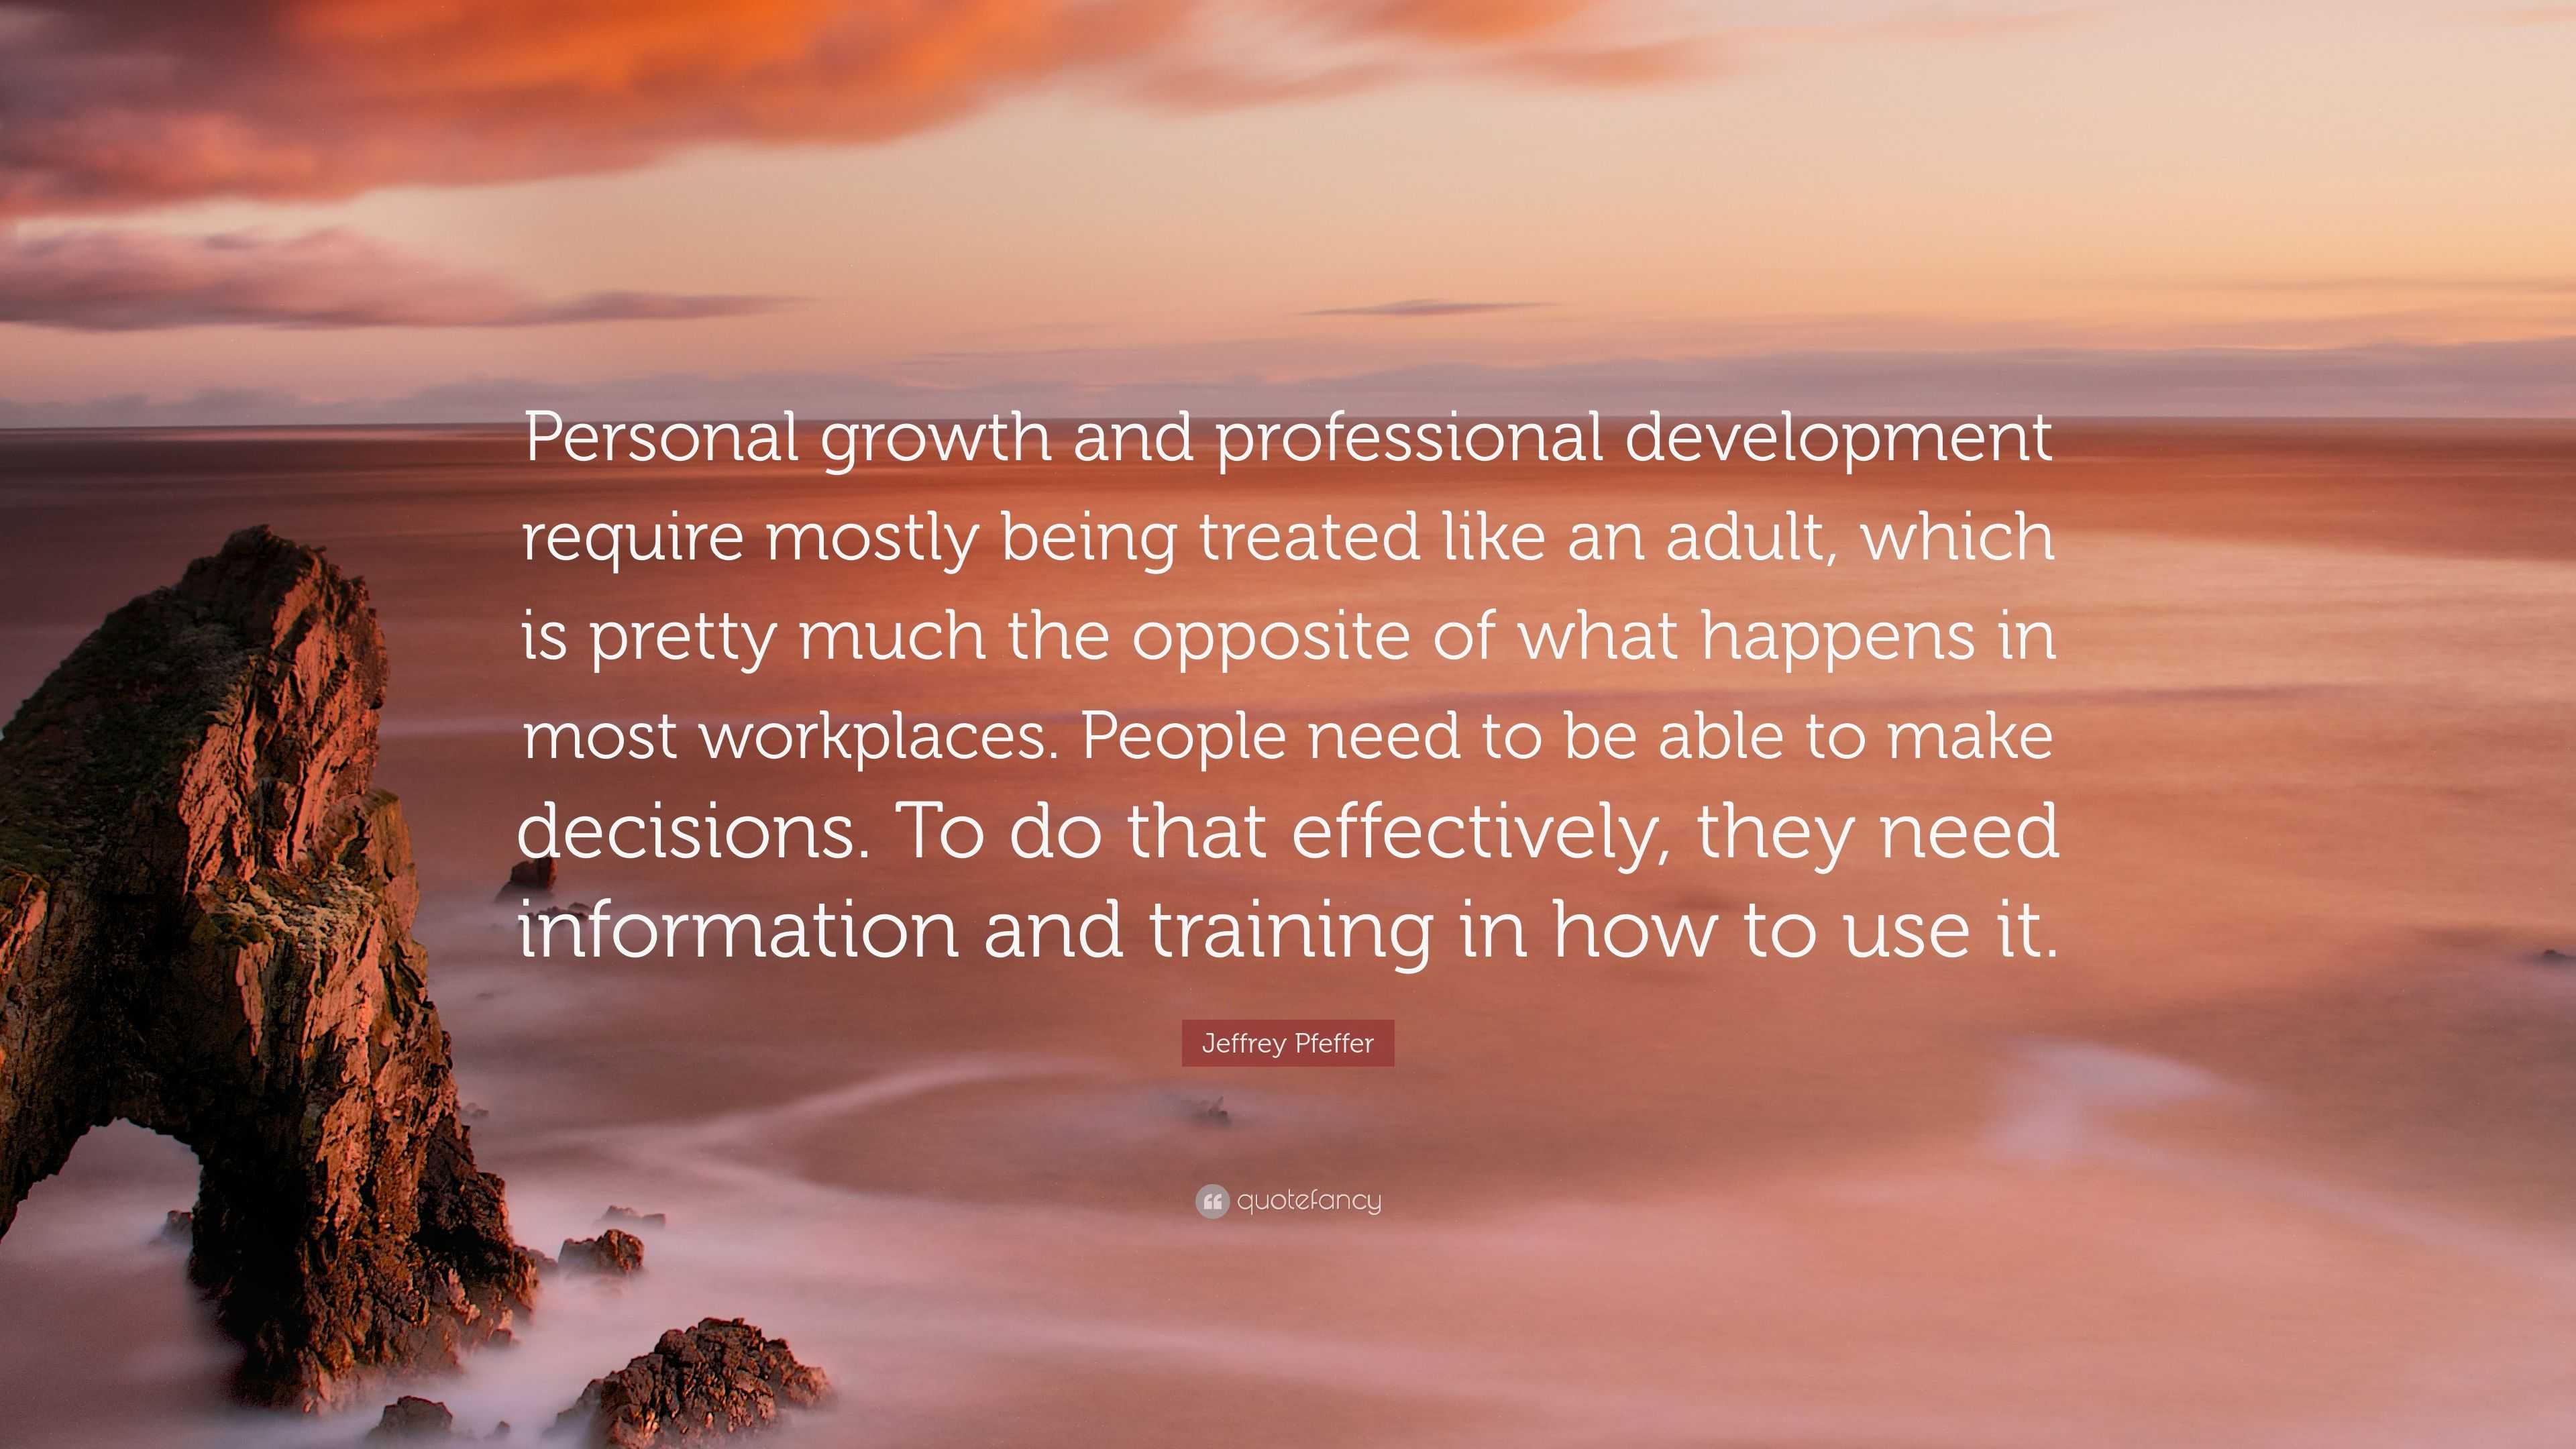 Jeffrey Pfeffer Quote “Personal growth and professional